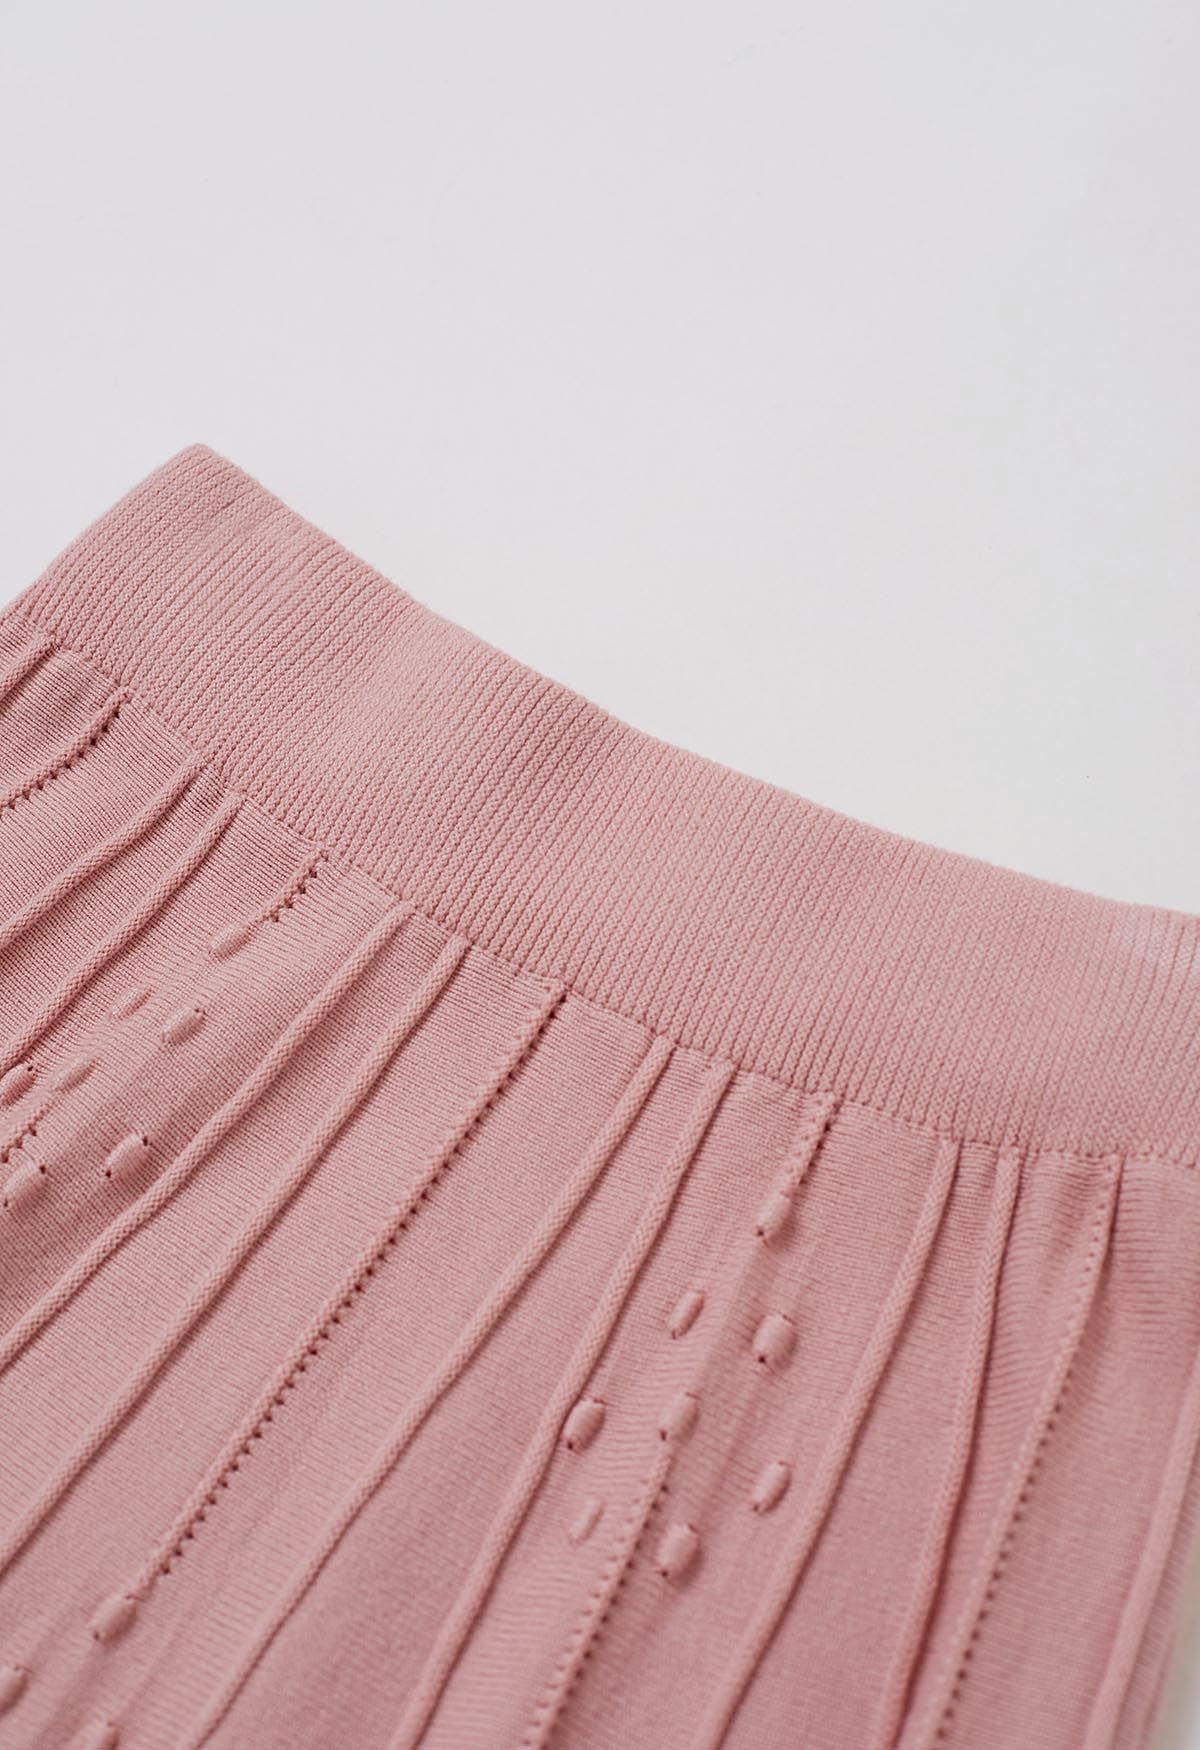 Embossed Dots Seam Knit Midi Skirt in Pink